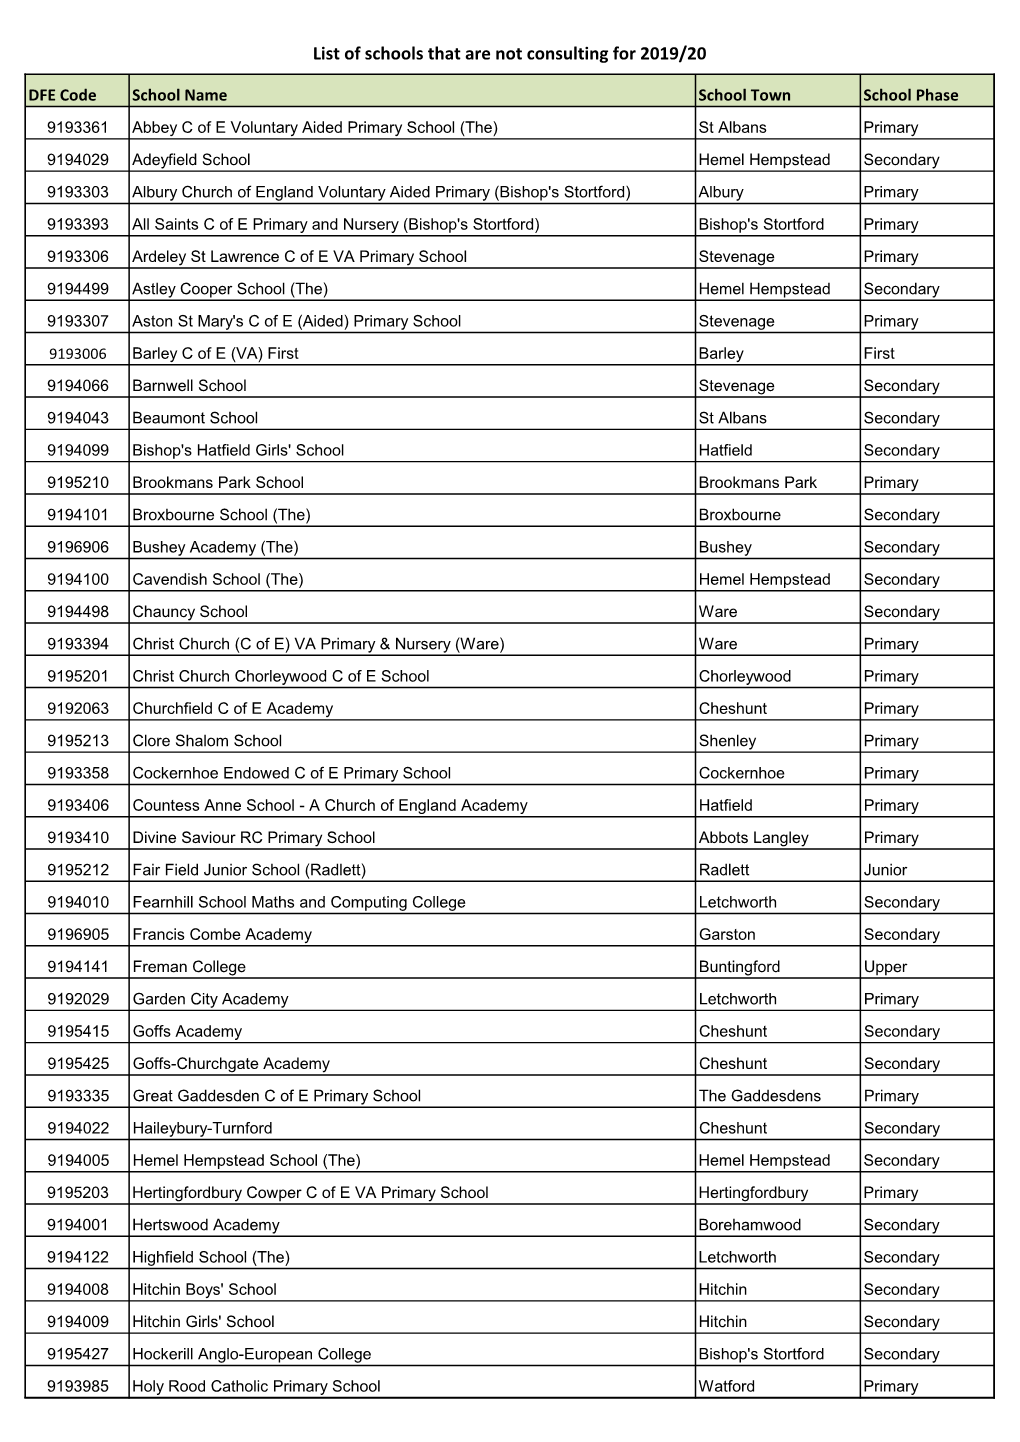 List of Schools That Are Not Consulting for 2019/20